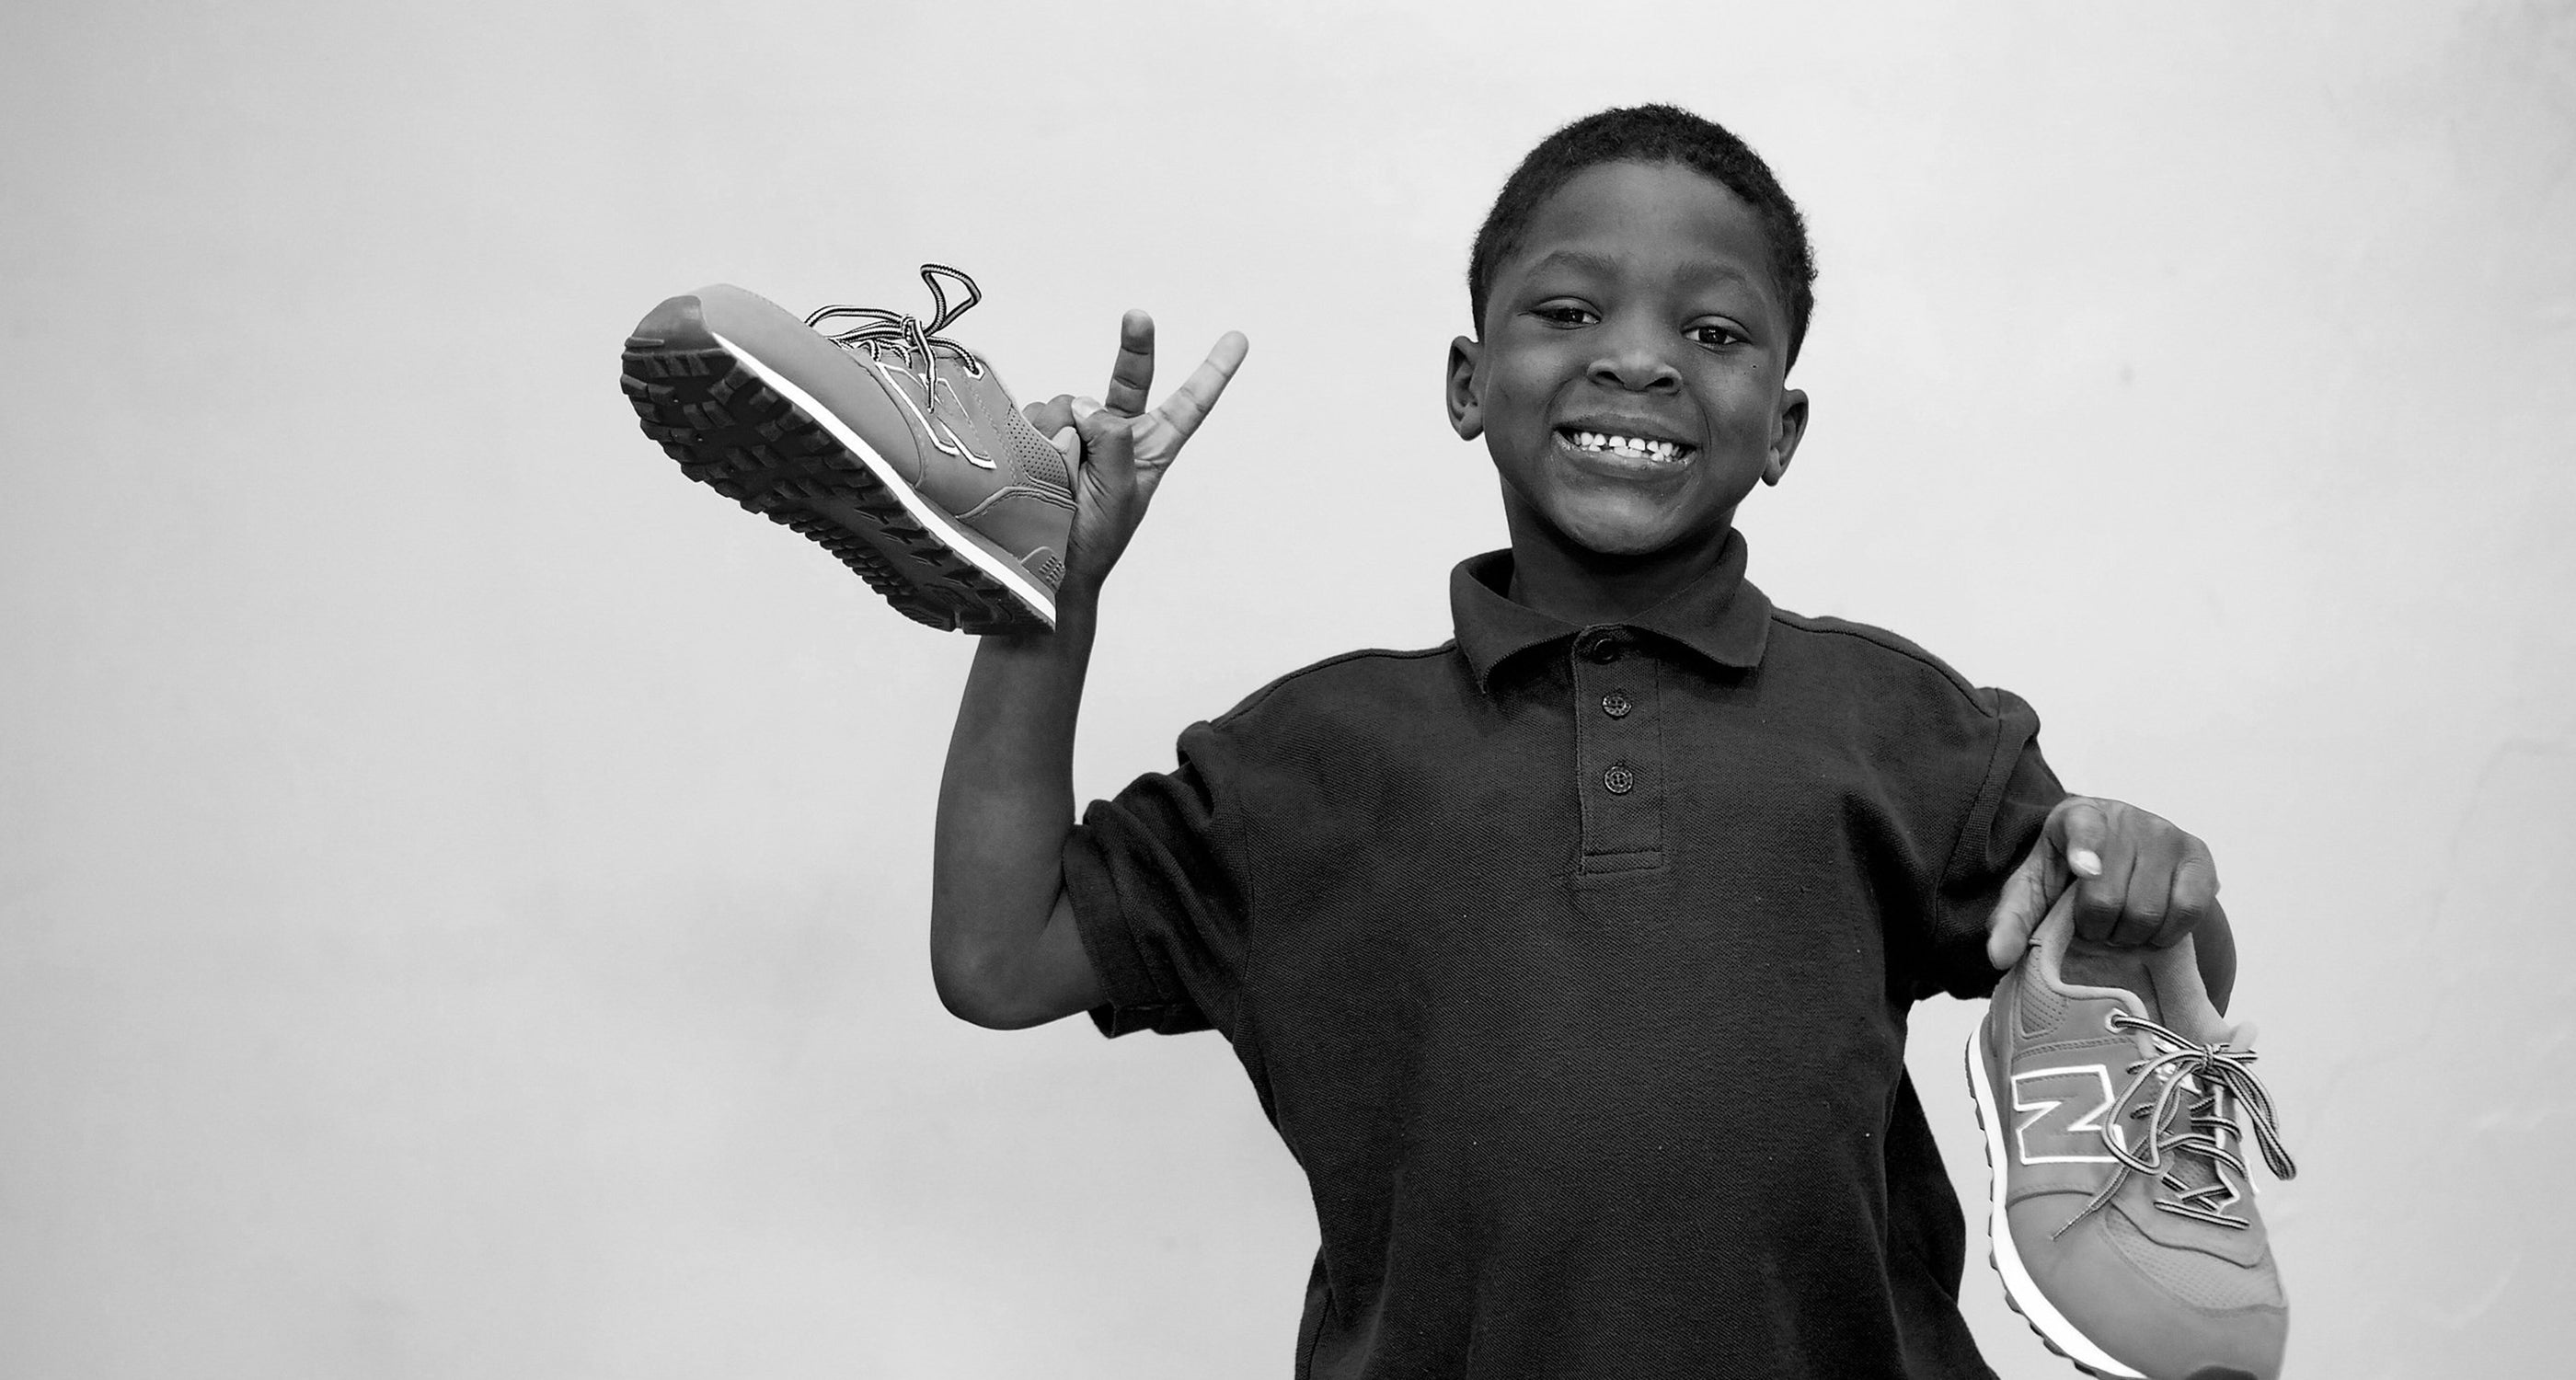 Child holding up New Balance Sneakers